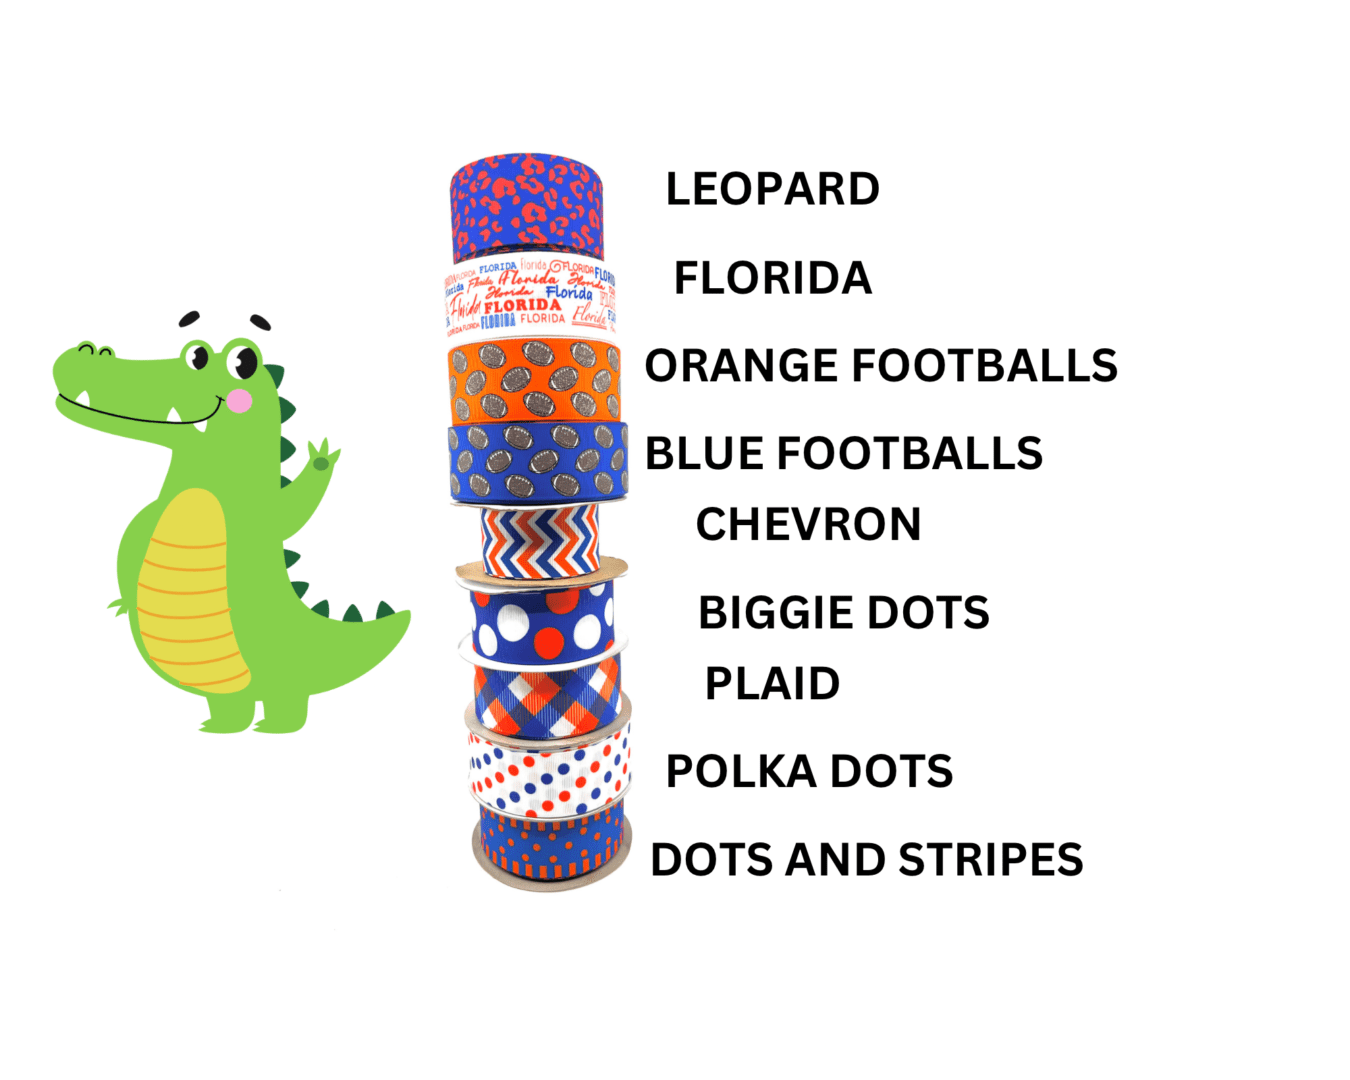 A picture of the florida gators and their colors.